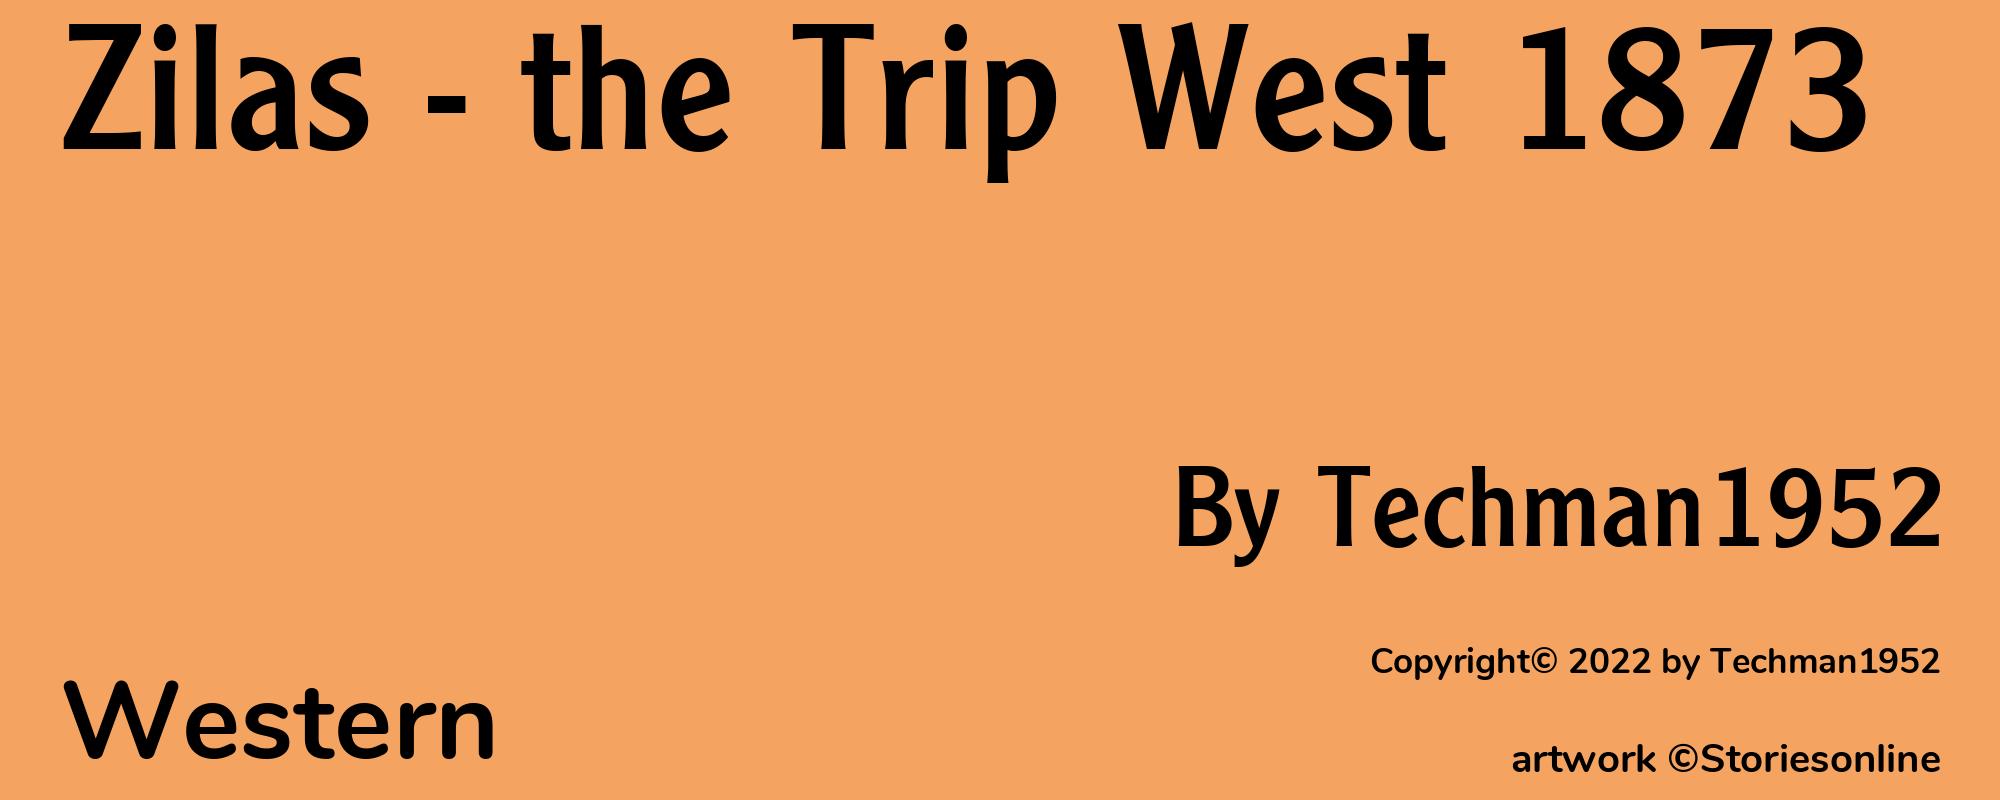 Zilas - the Trip West 1873 - Cover